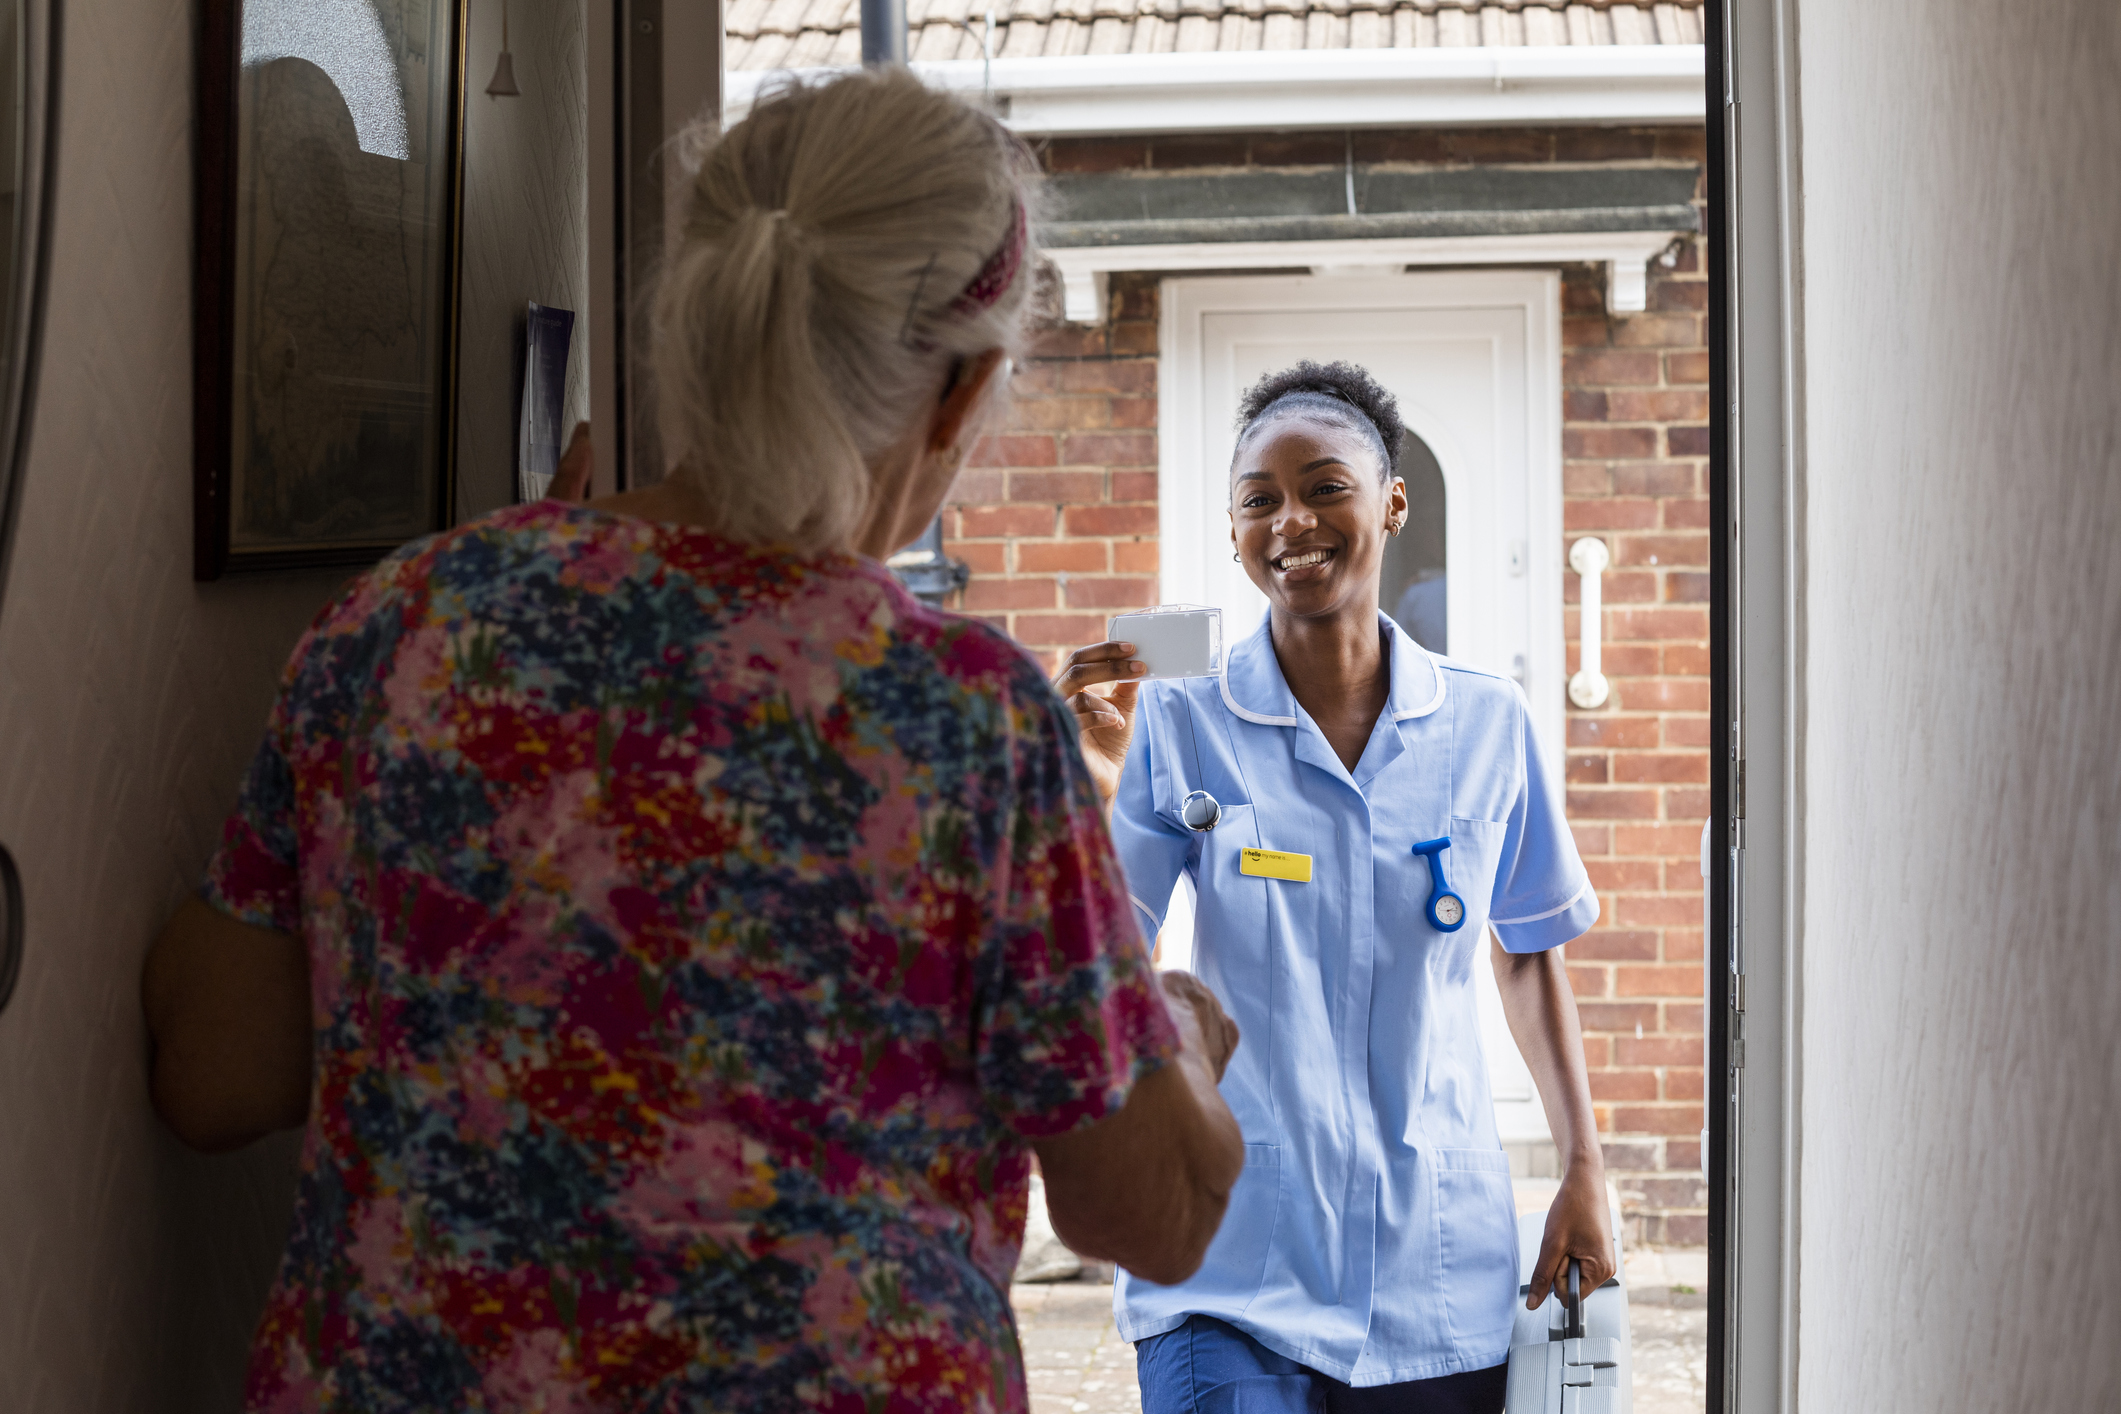 Nurse arriving at a patient's house showing her ID card in the North East of England. She is a home caregiver.